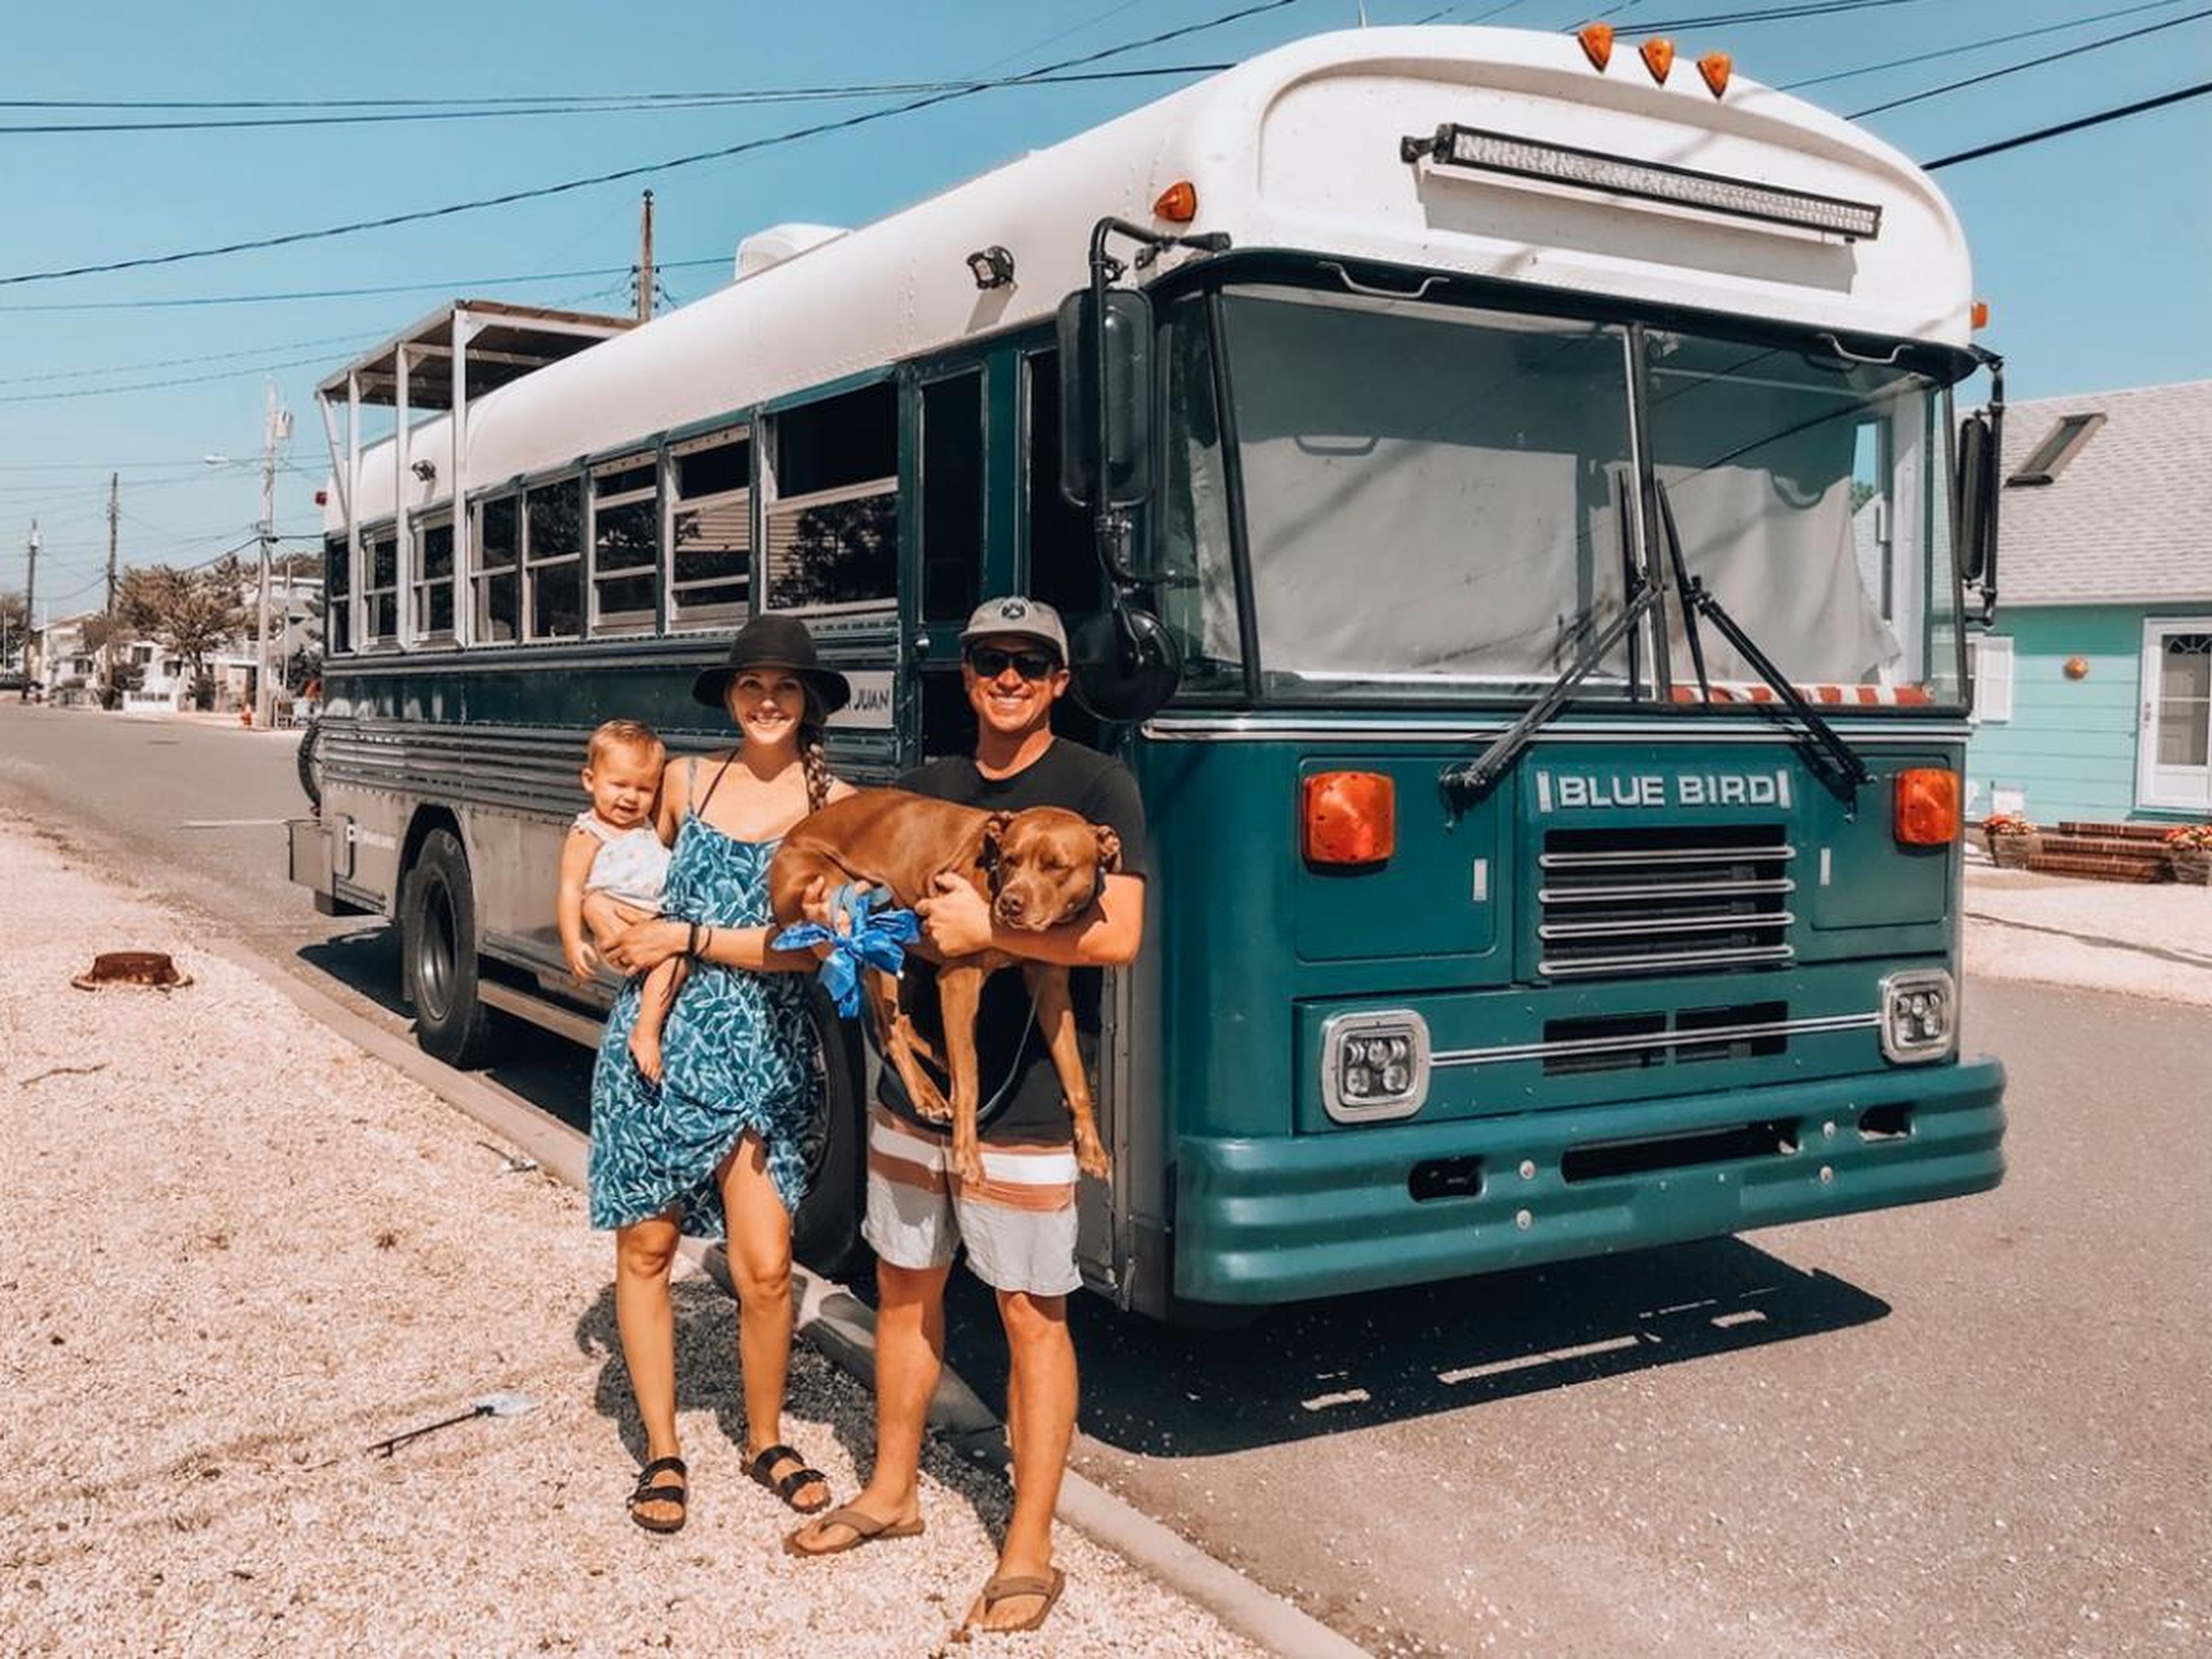 A family of four converted a decommissioned Air Force bus into an RV to live in — see inside